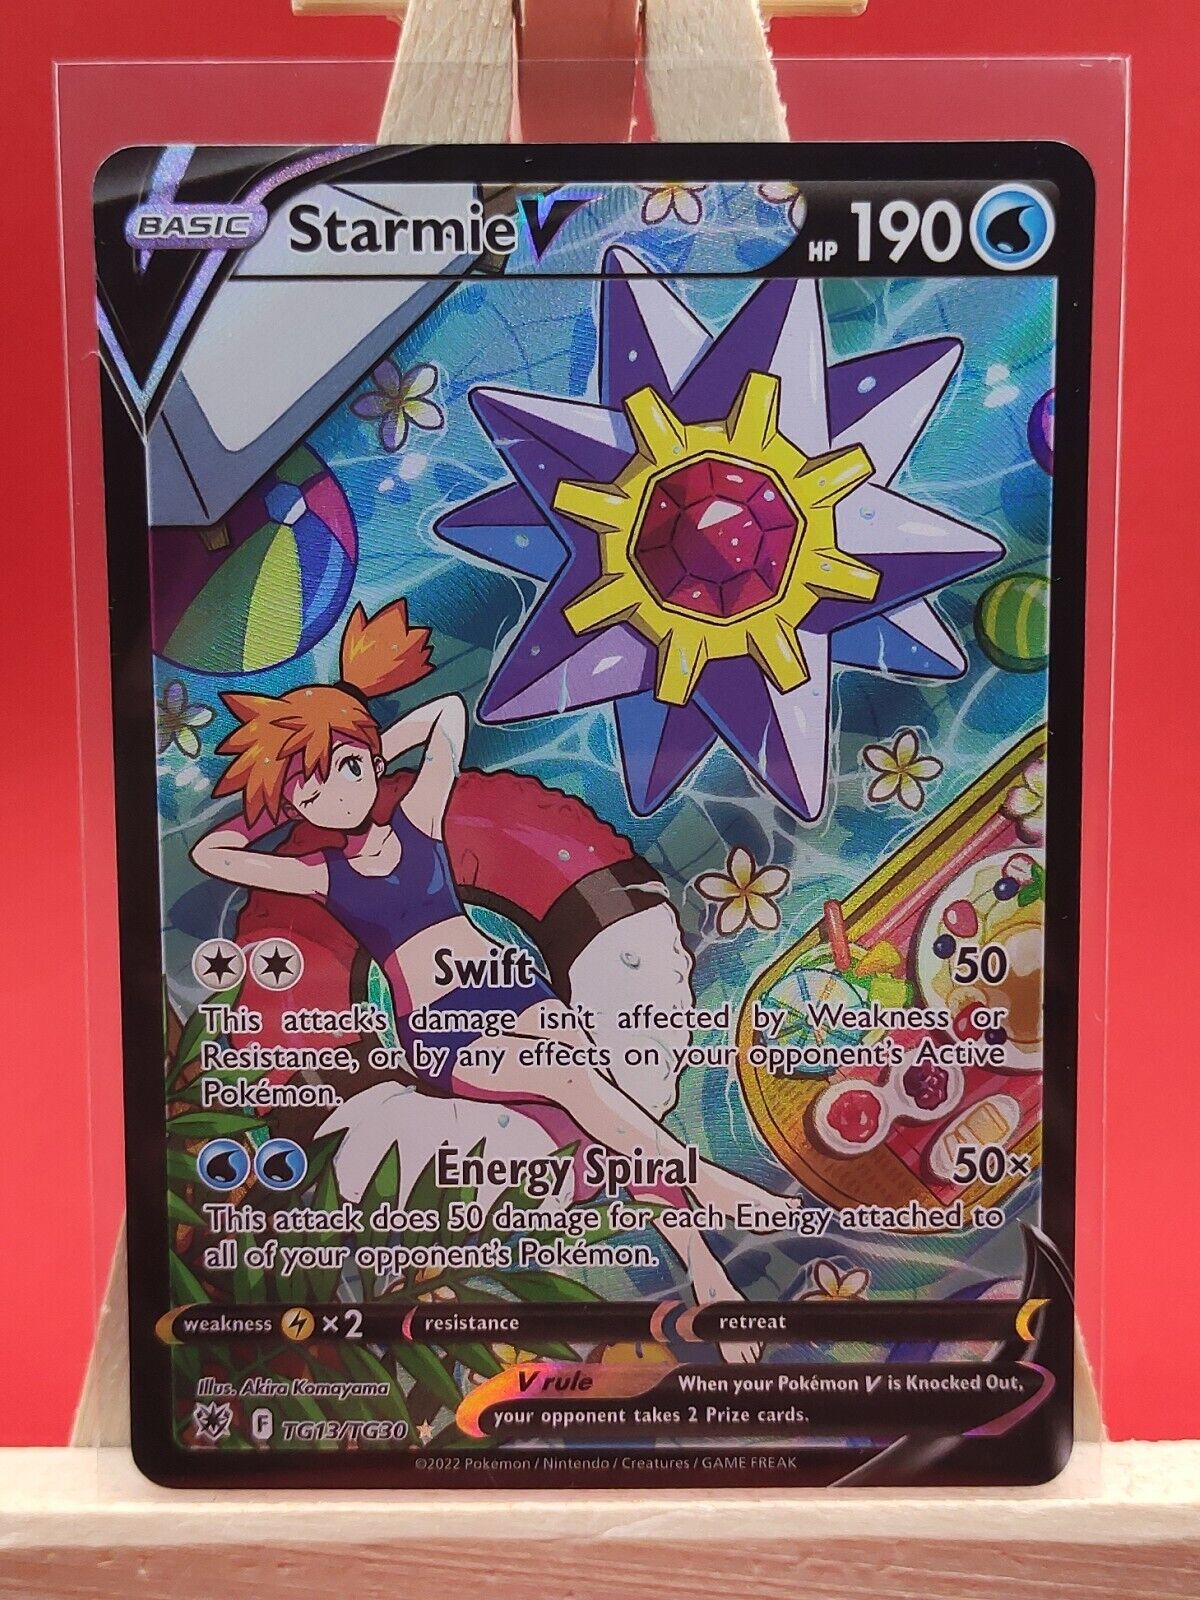 Starmie V TG13/TG30 Astral Radiance Trainer Gallery Ultra Rare Pokemon Card New